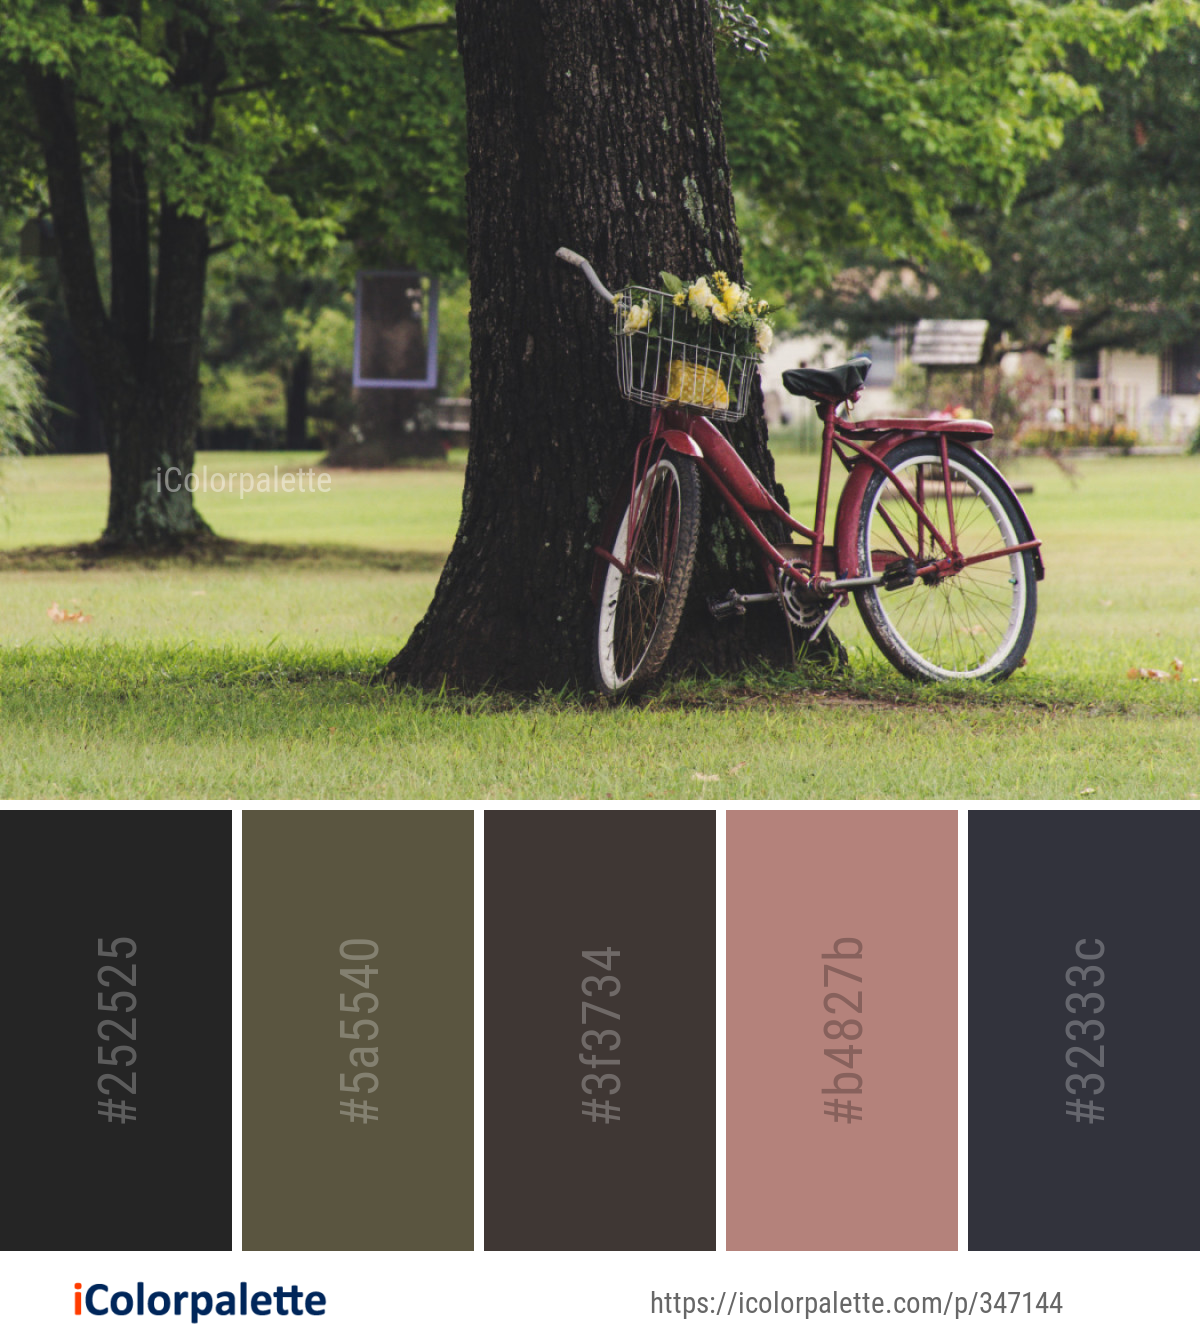 Color Palette Ideas from Land Vehicle Bicycle Tree Image